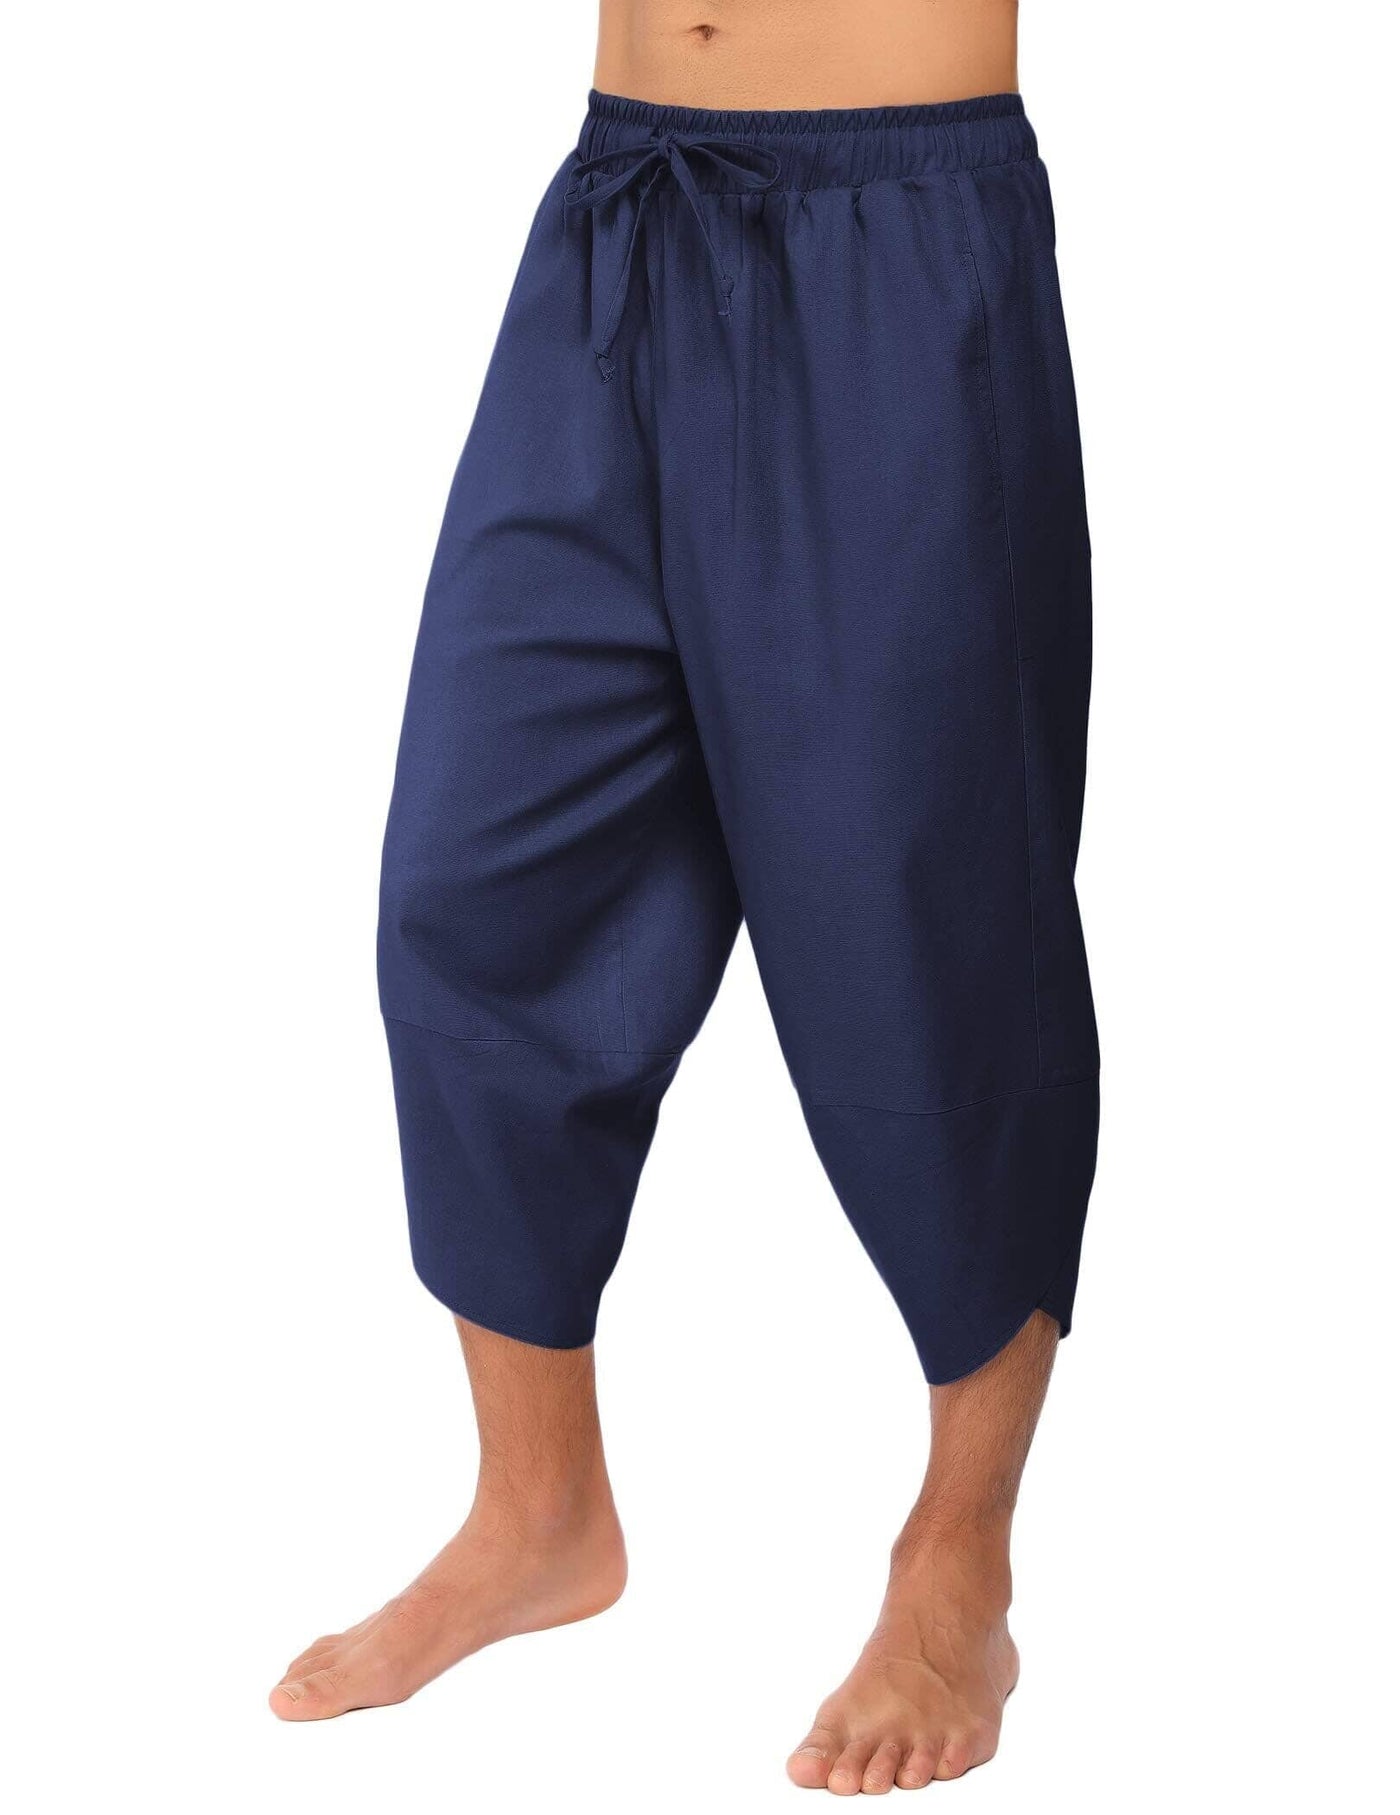 Coofandy Linen Style 3/4 Shorts Yoga Trousers (US Only) Pants coofandy Navy Blue S 